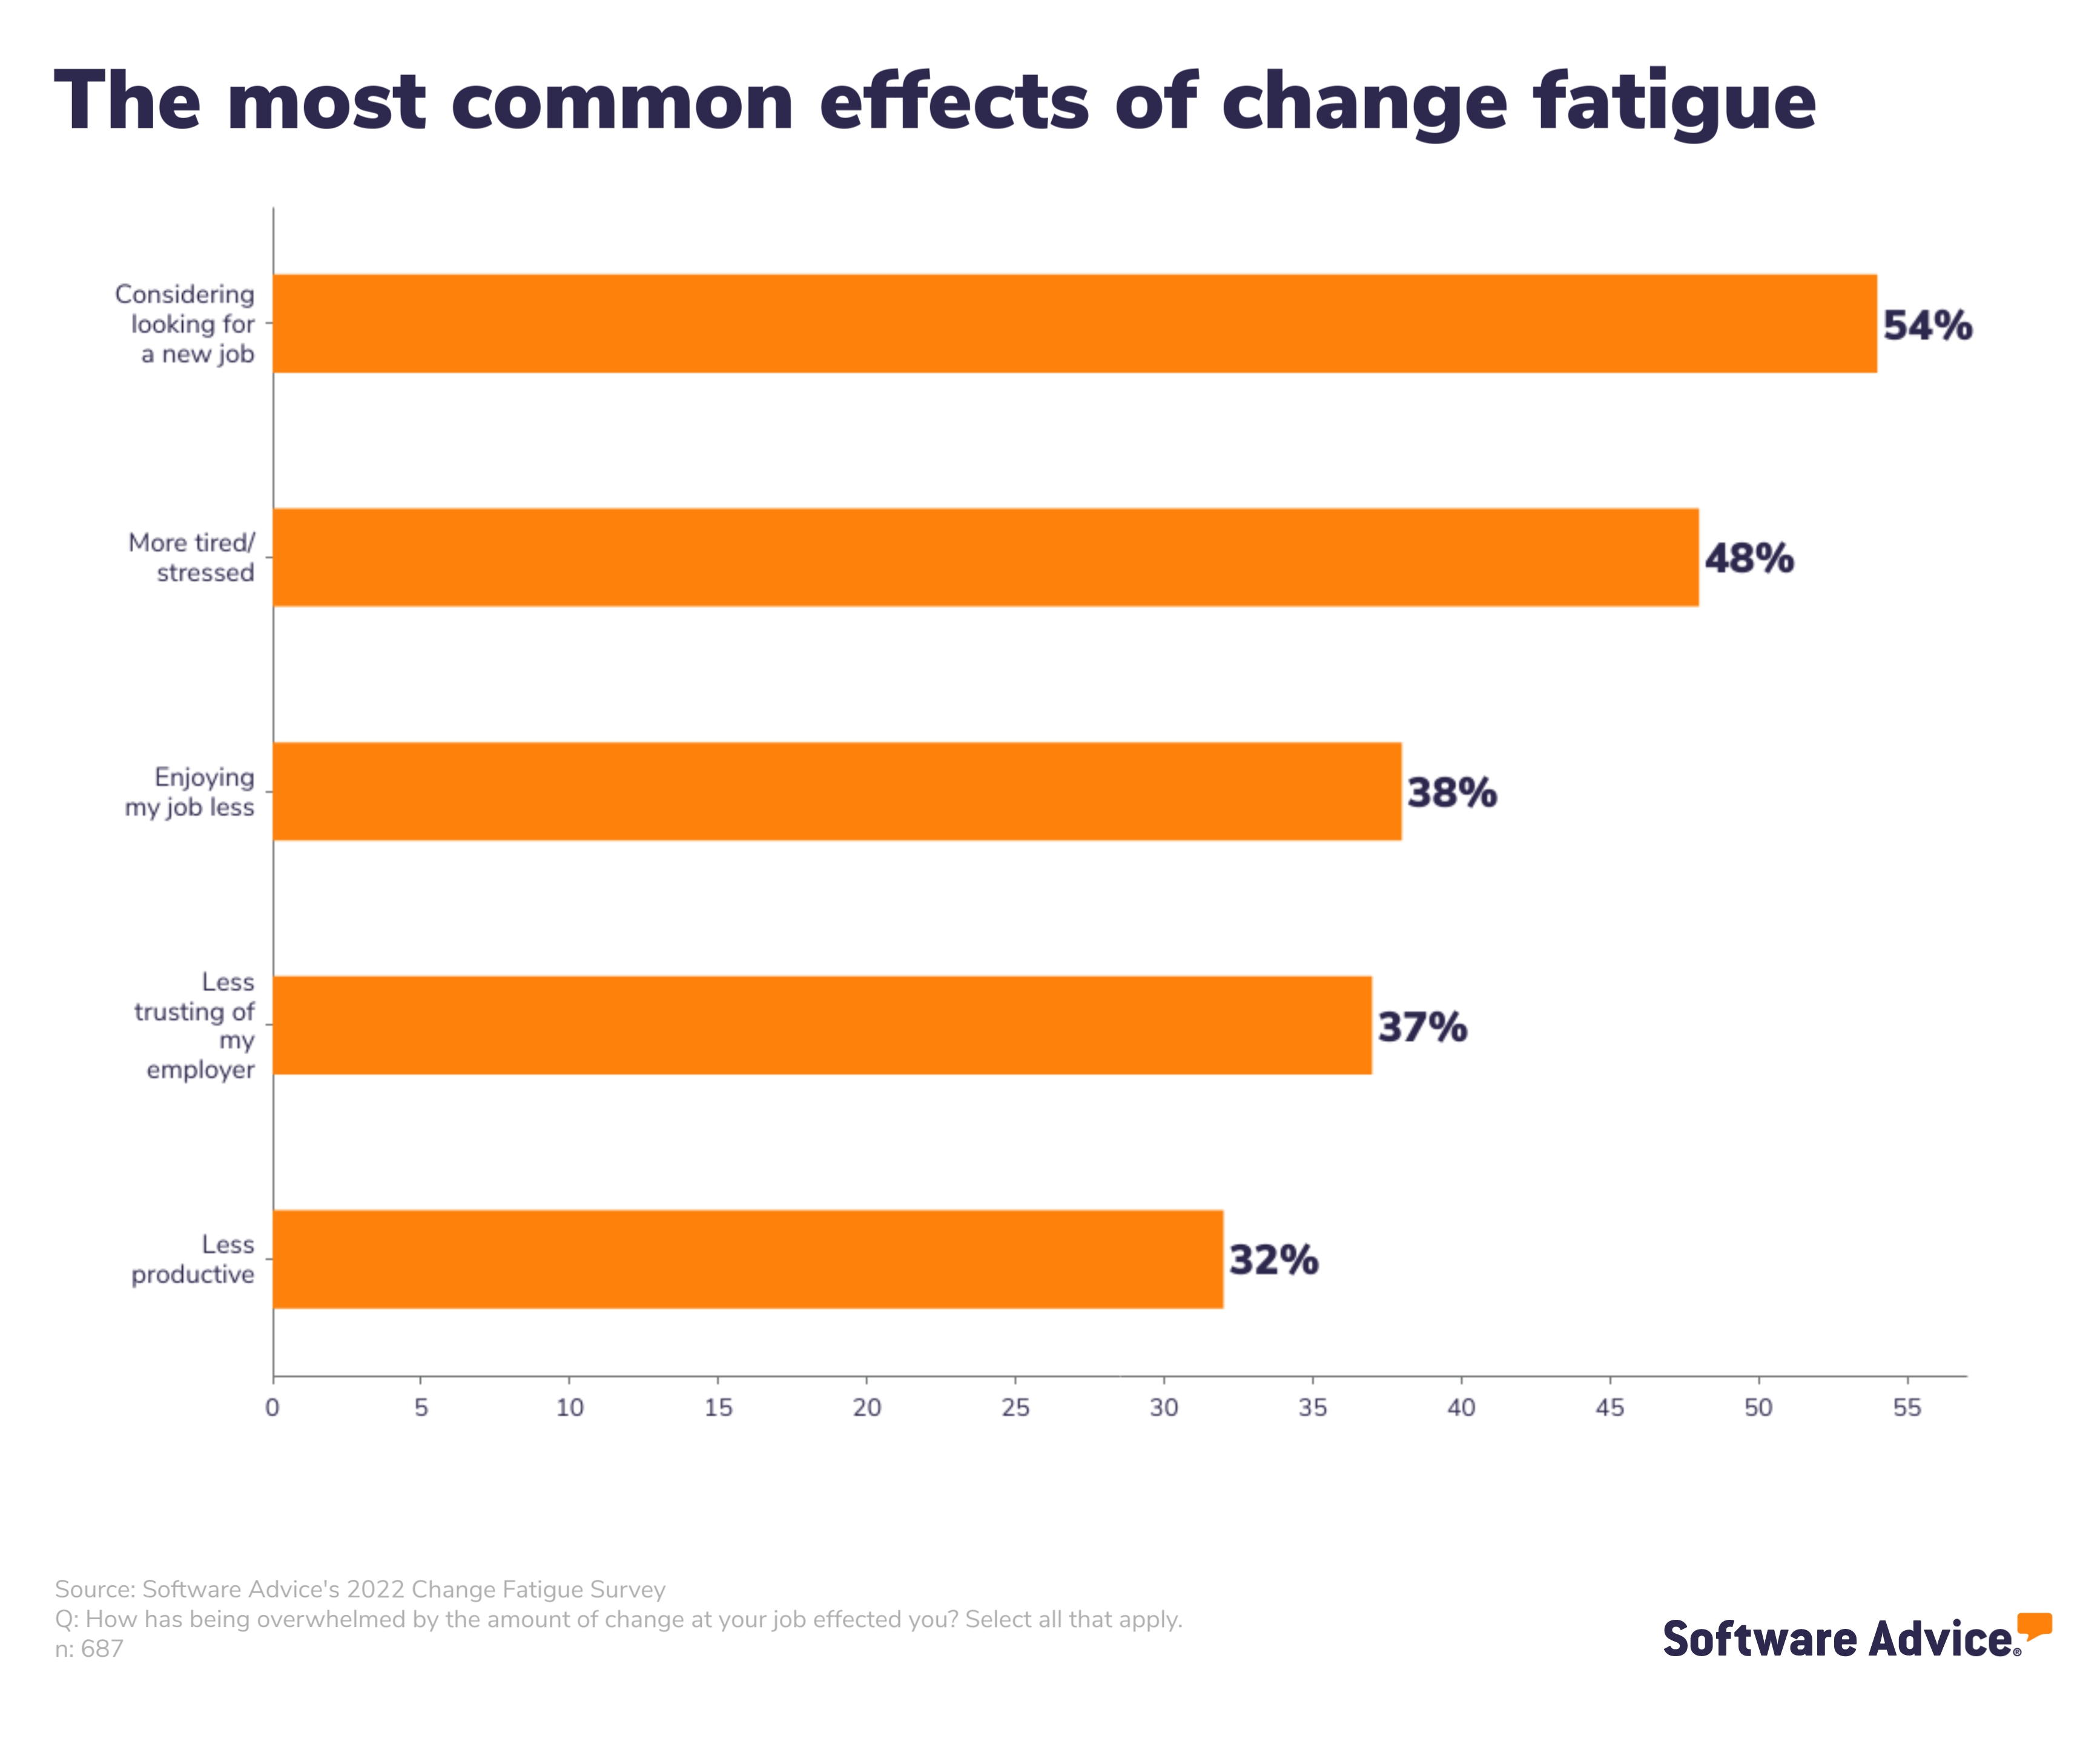 The most common effects of change fatigue